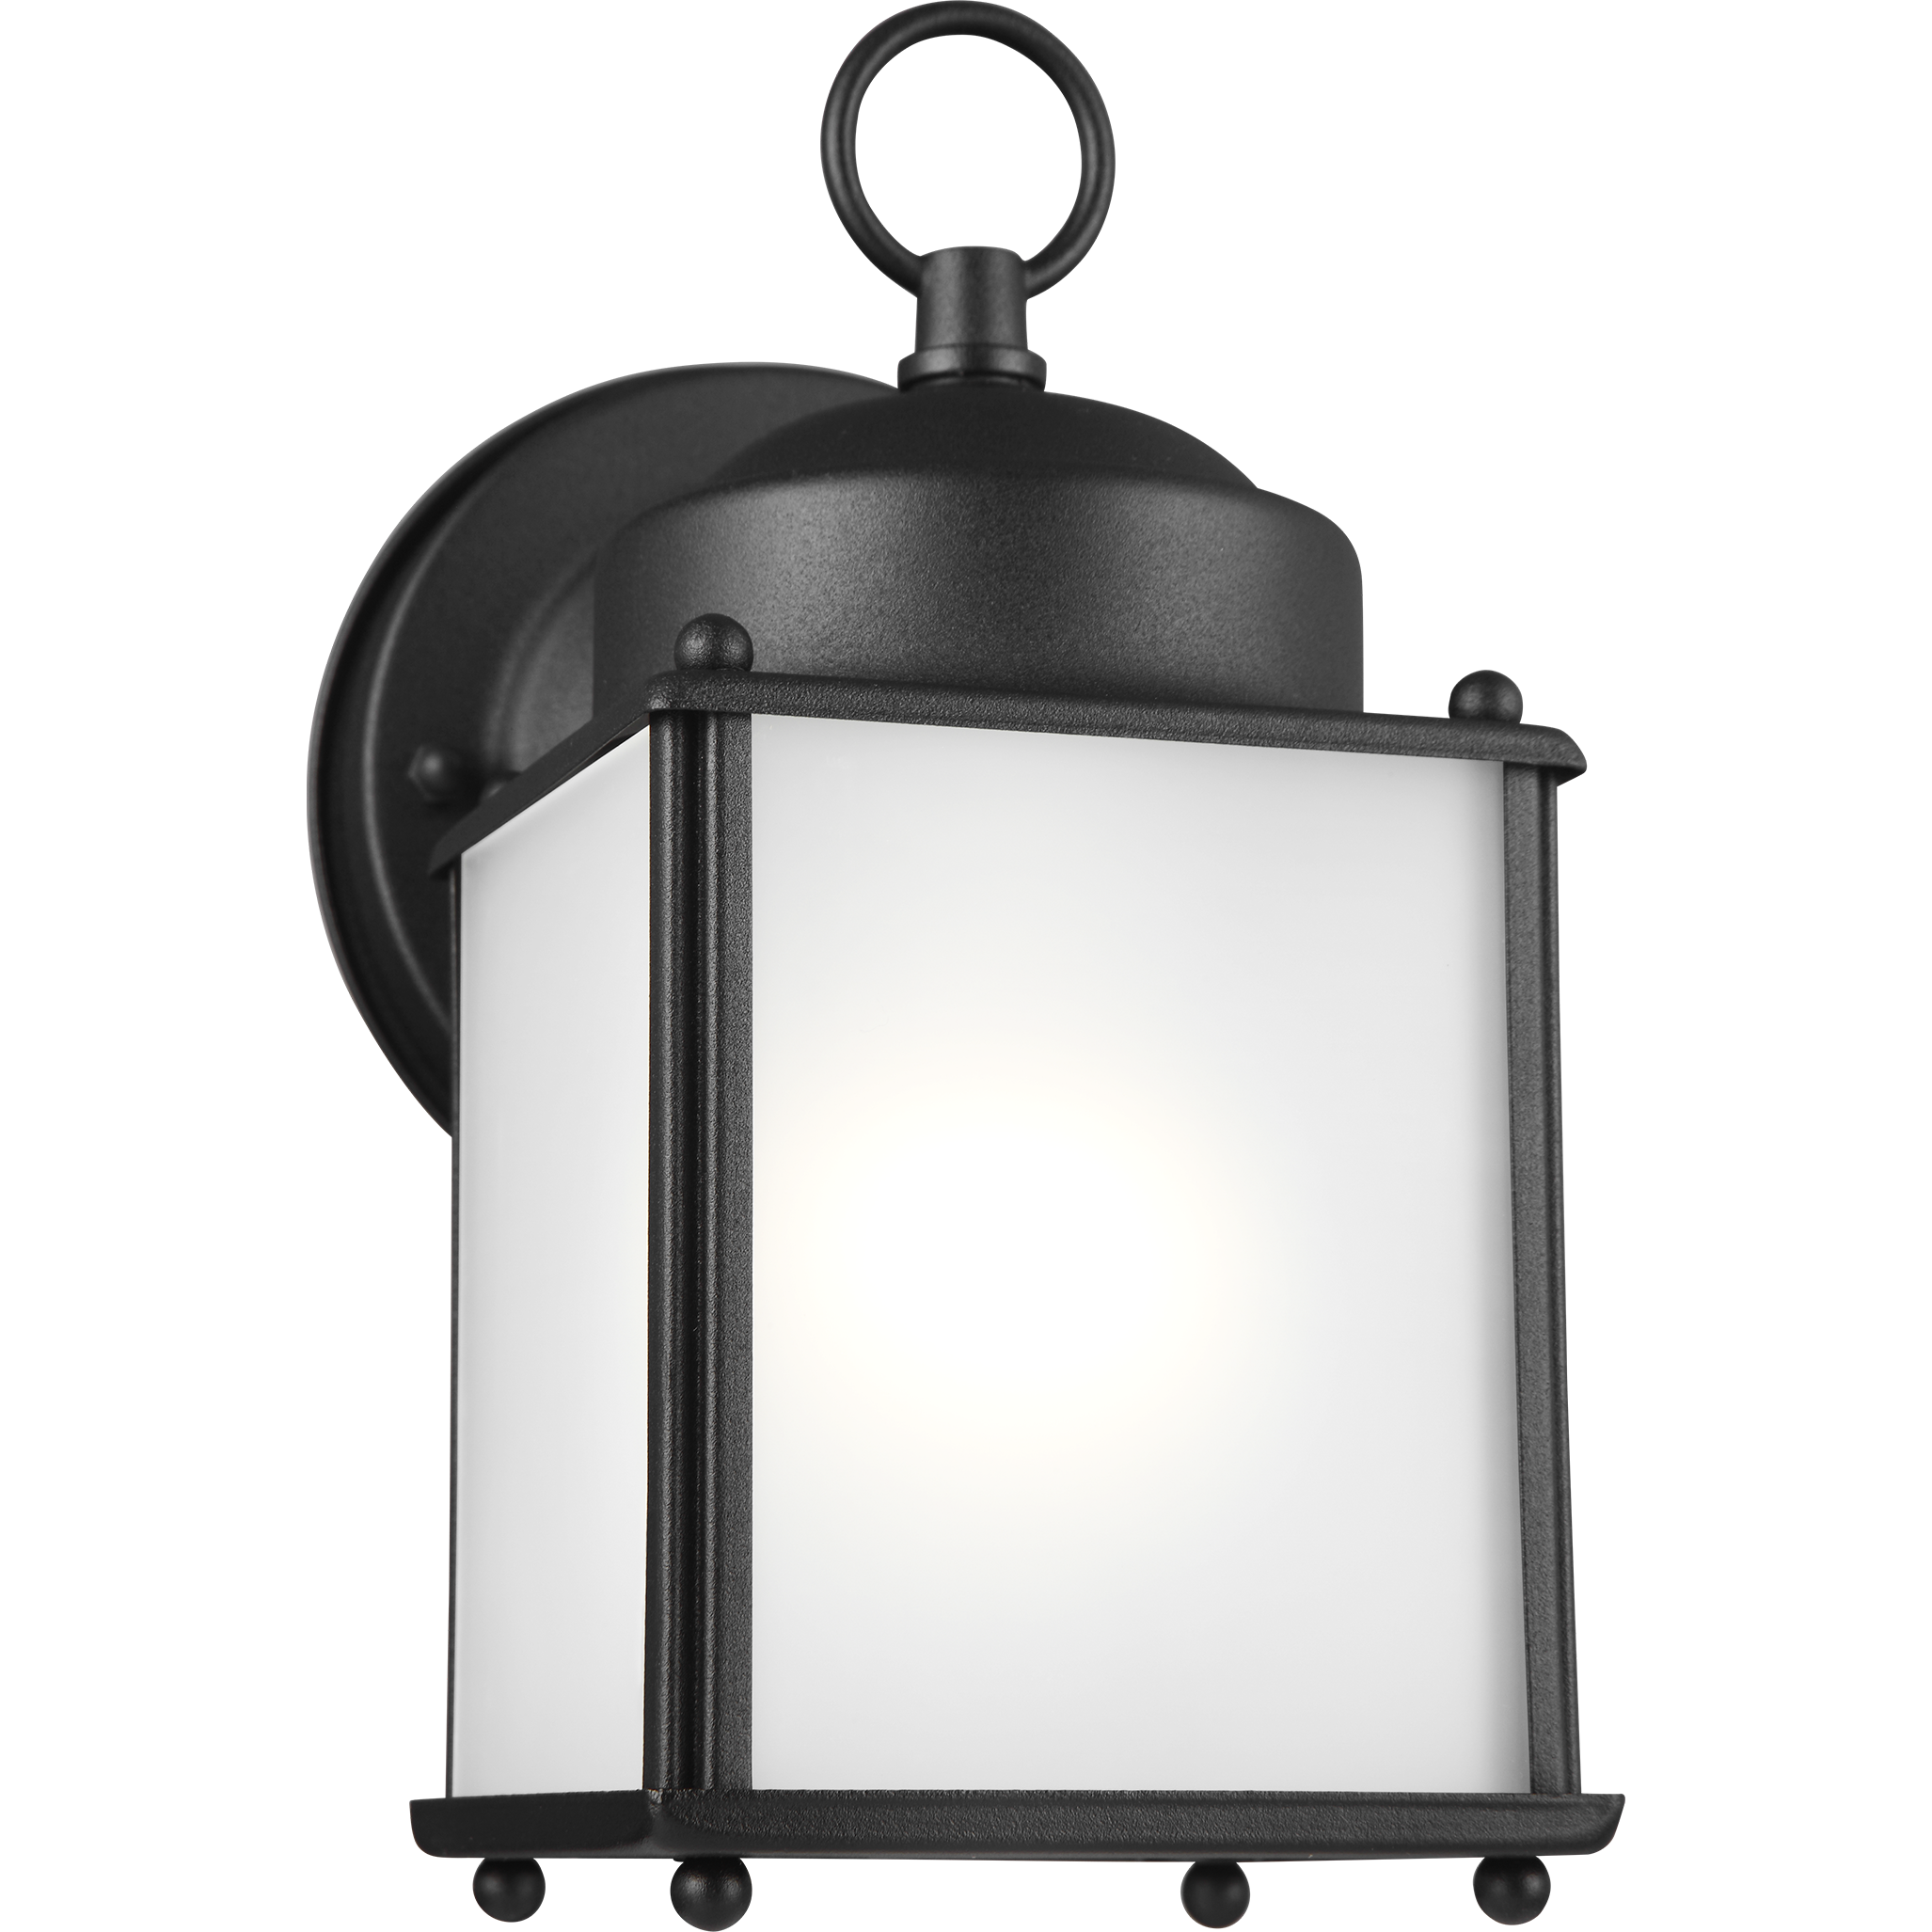 New Castle 1-Light Outdoor Wall Light (with Bulb)